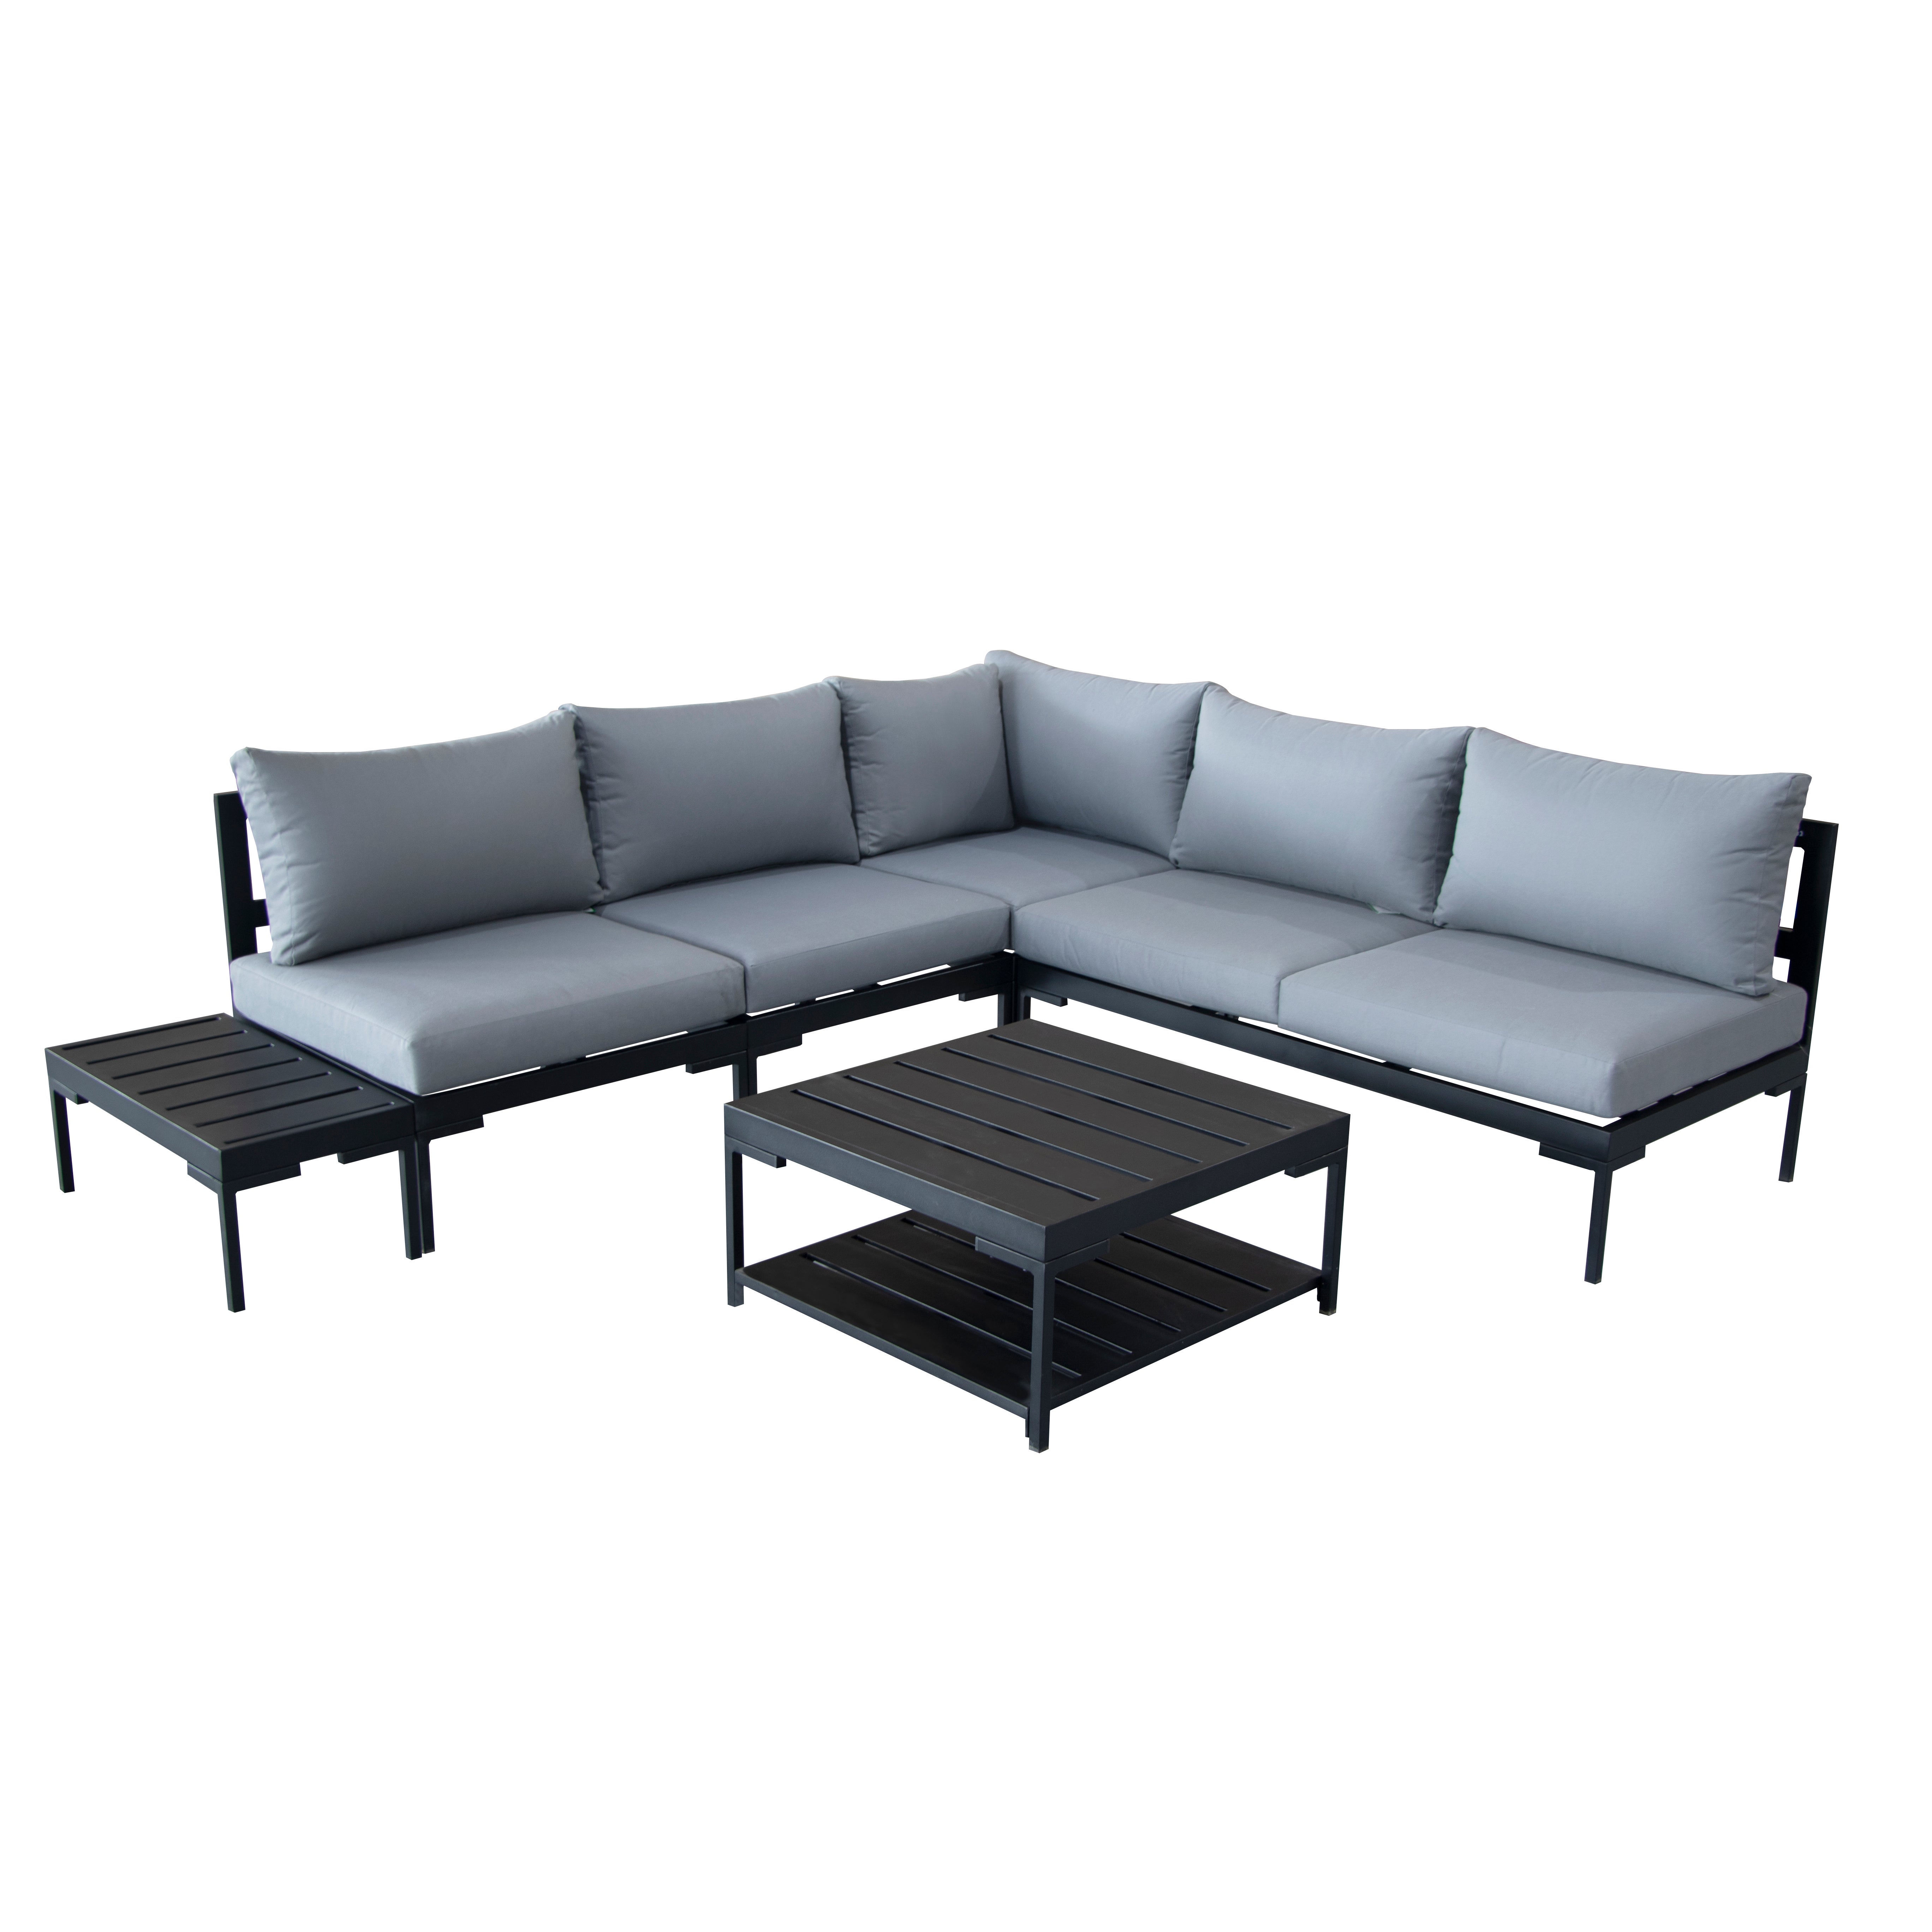 Elements Black Modular 5 Seater Corner Sofa Set With Coffee And Side Tables Black